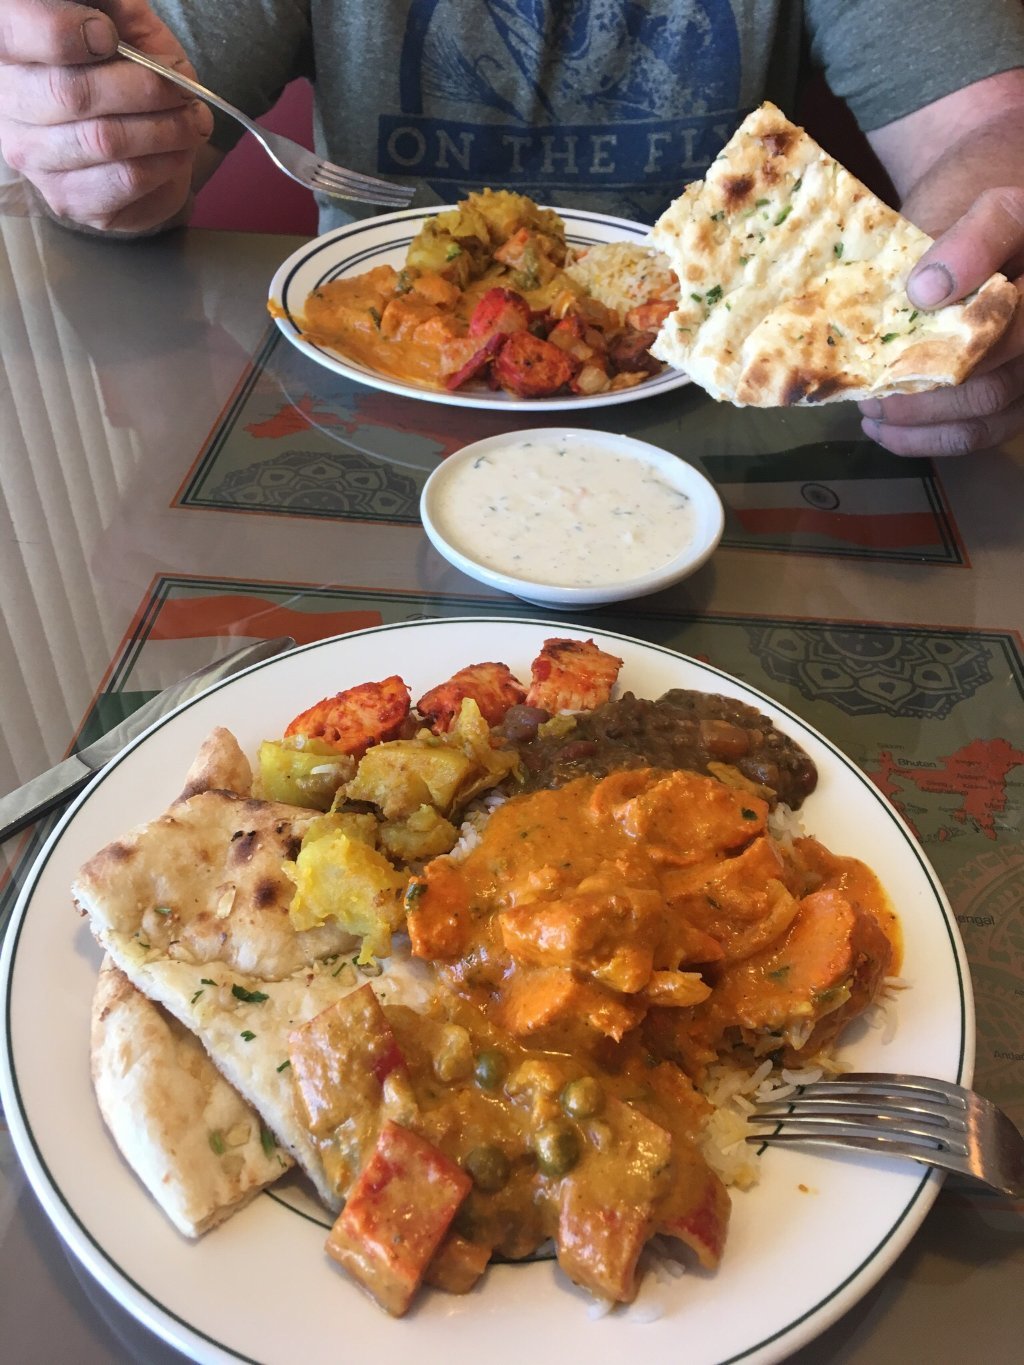 Bombay Curry & Grill